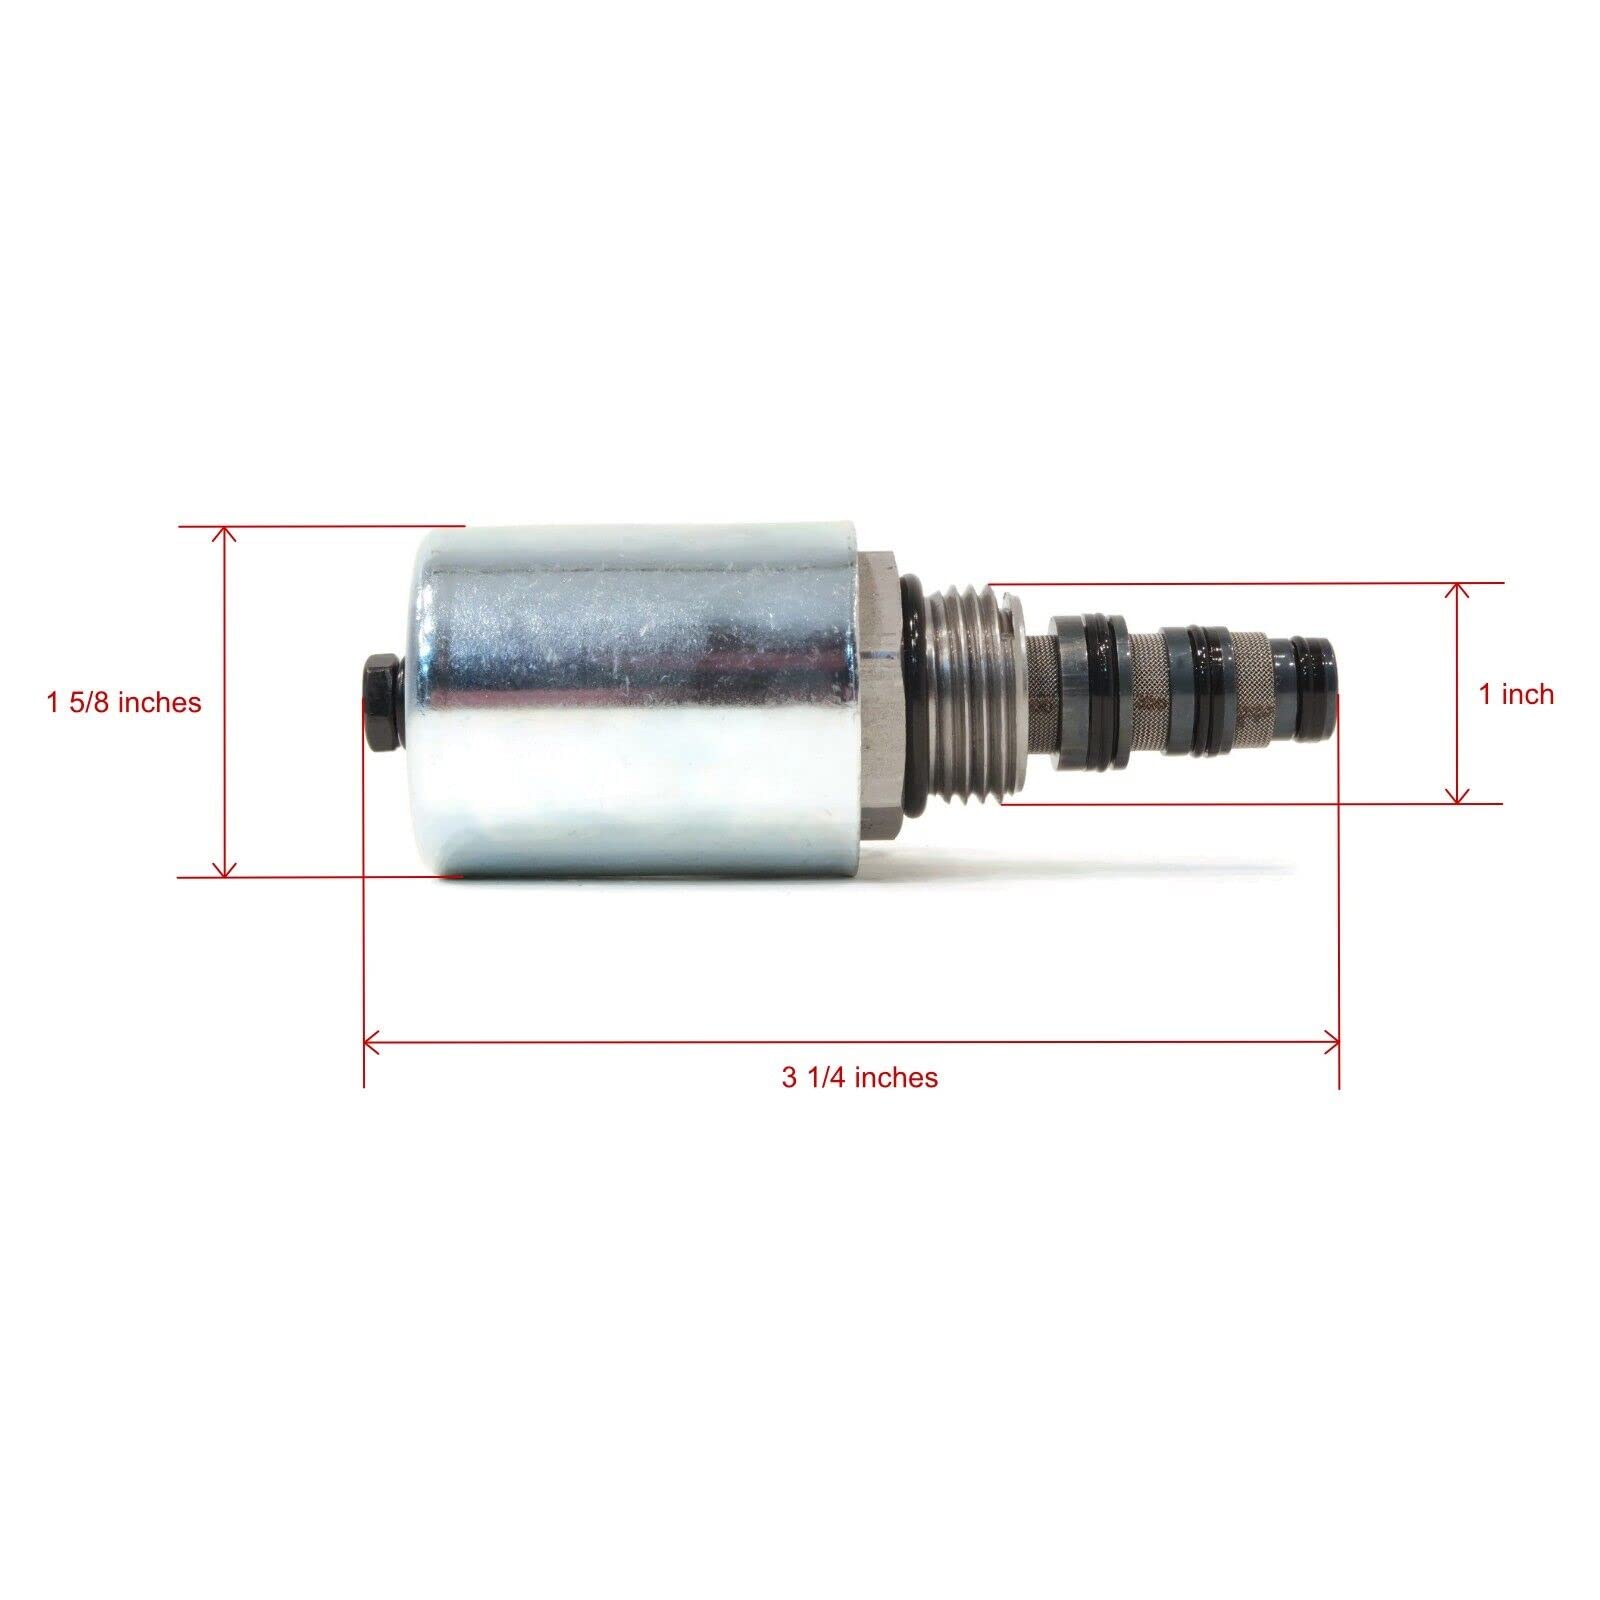 The ROP Shop | Buyers Products 5/8" Stem "C" Solenoid Coil & Valve Kit for Maxim 411613 Plow